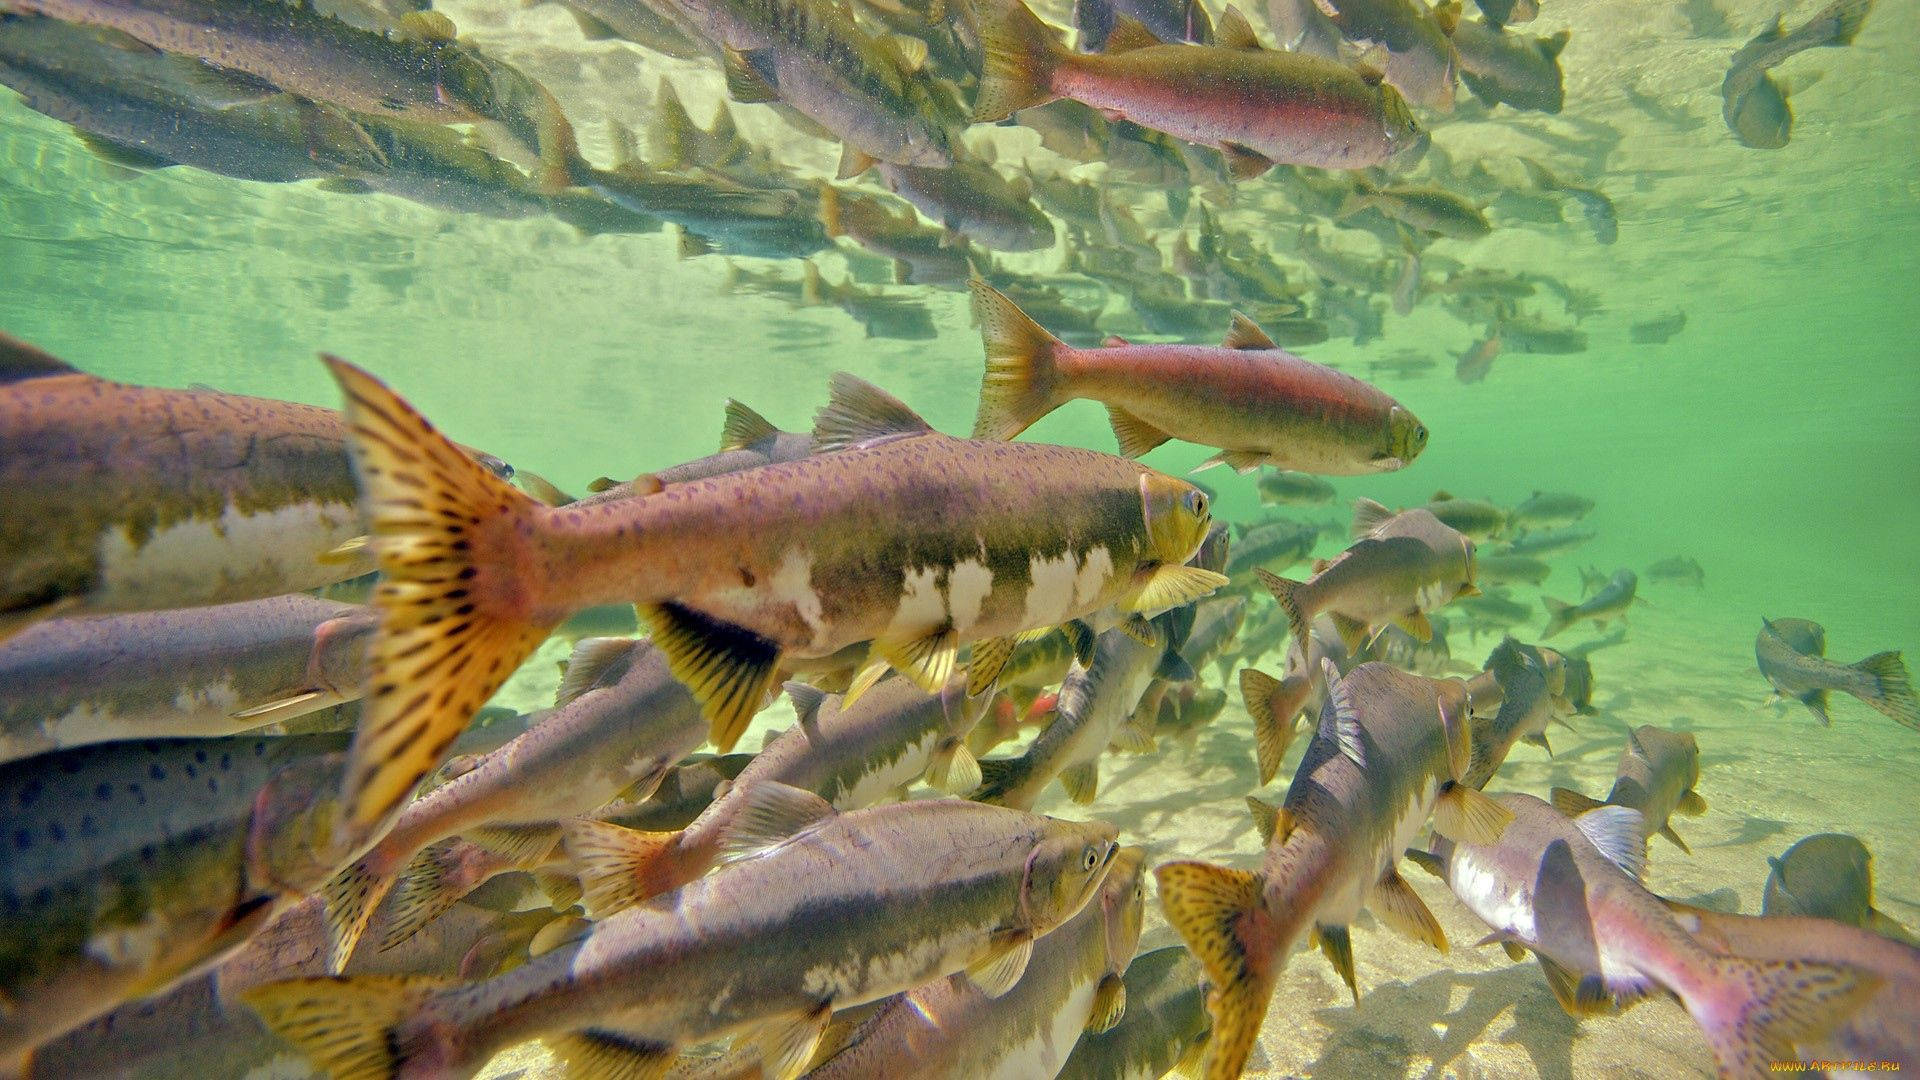 Group Of Fish In The River Background